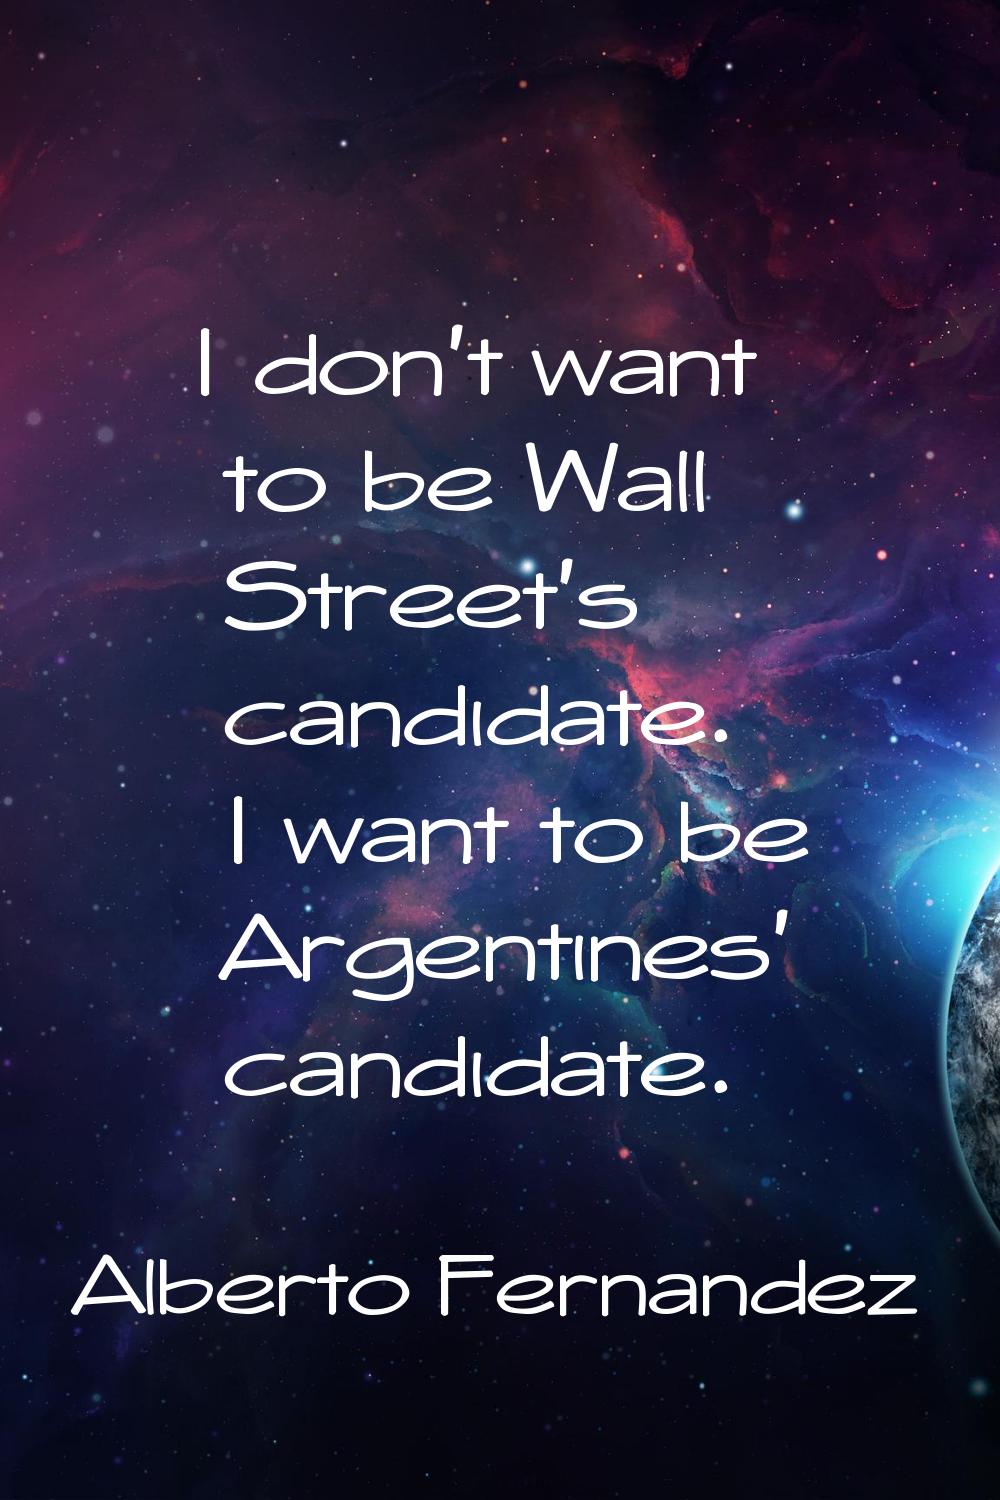 I don't want to be Wall Street's candidate. I want to be Argentines' candidate.